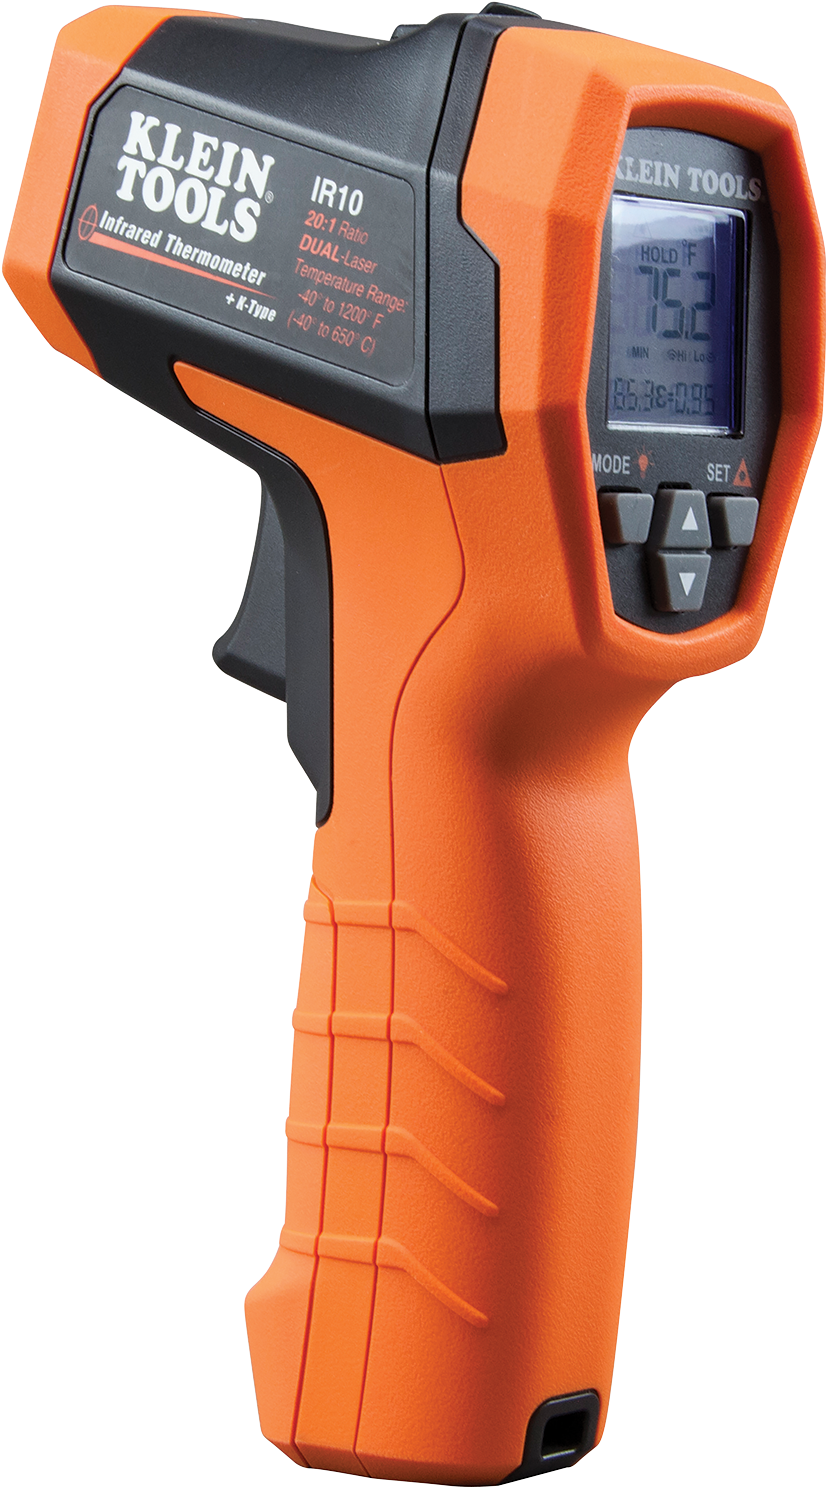 An Orange And Black Infrared Thermometer